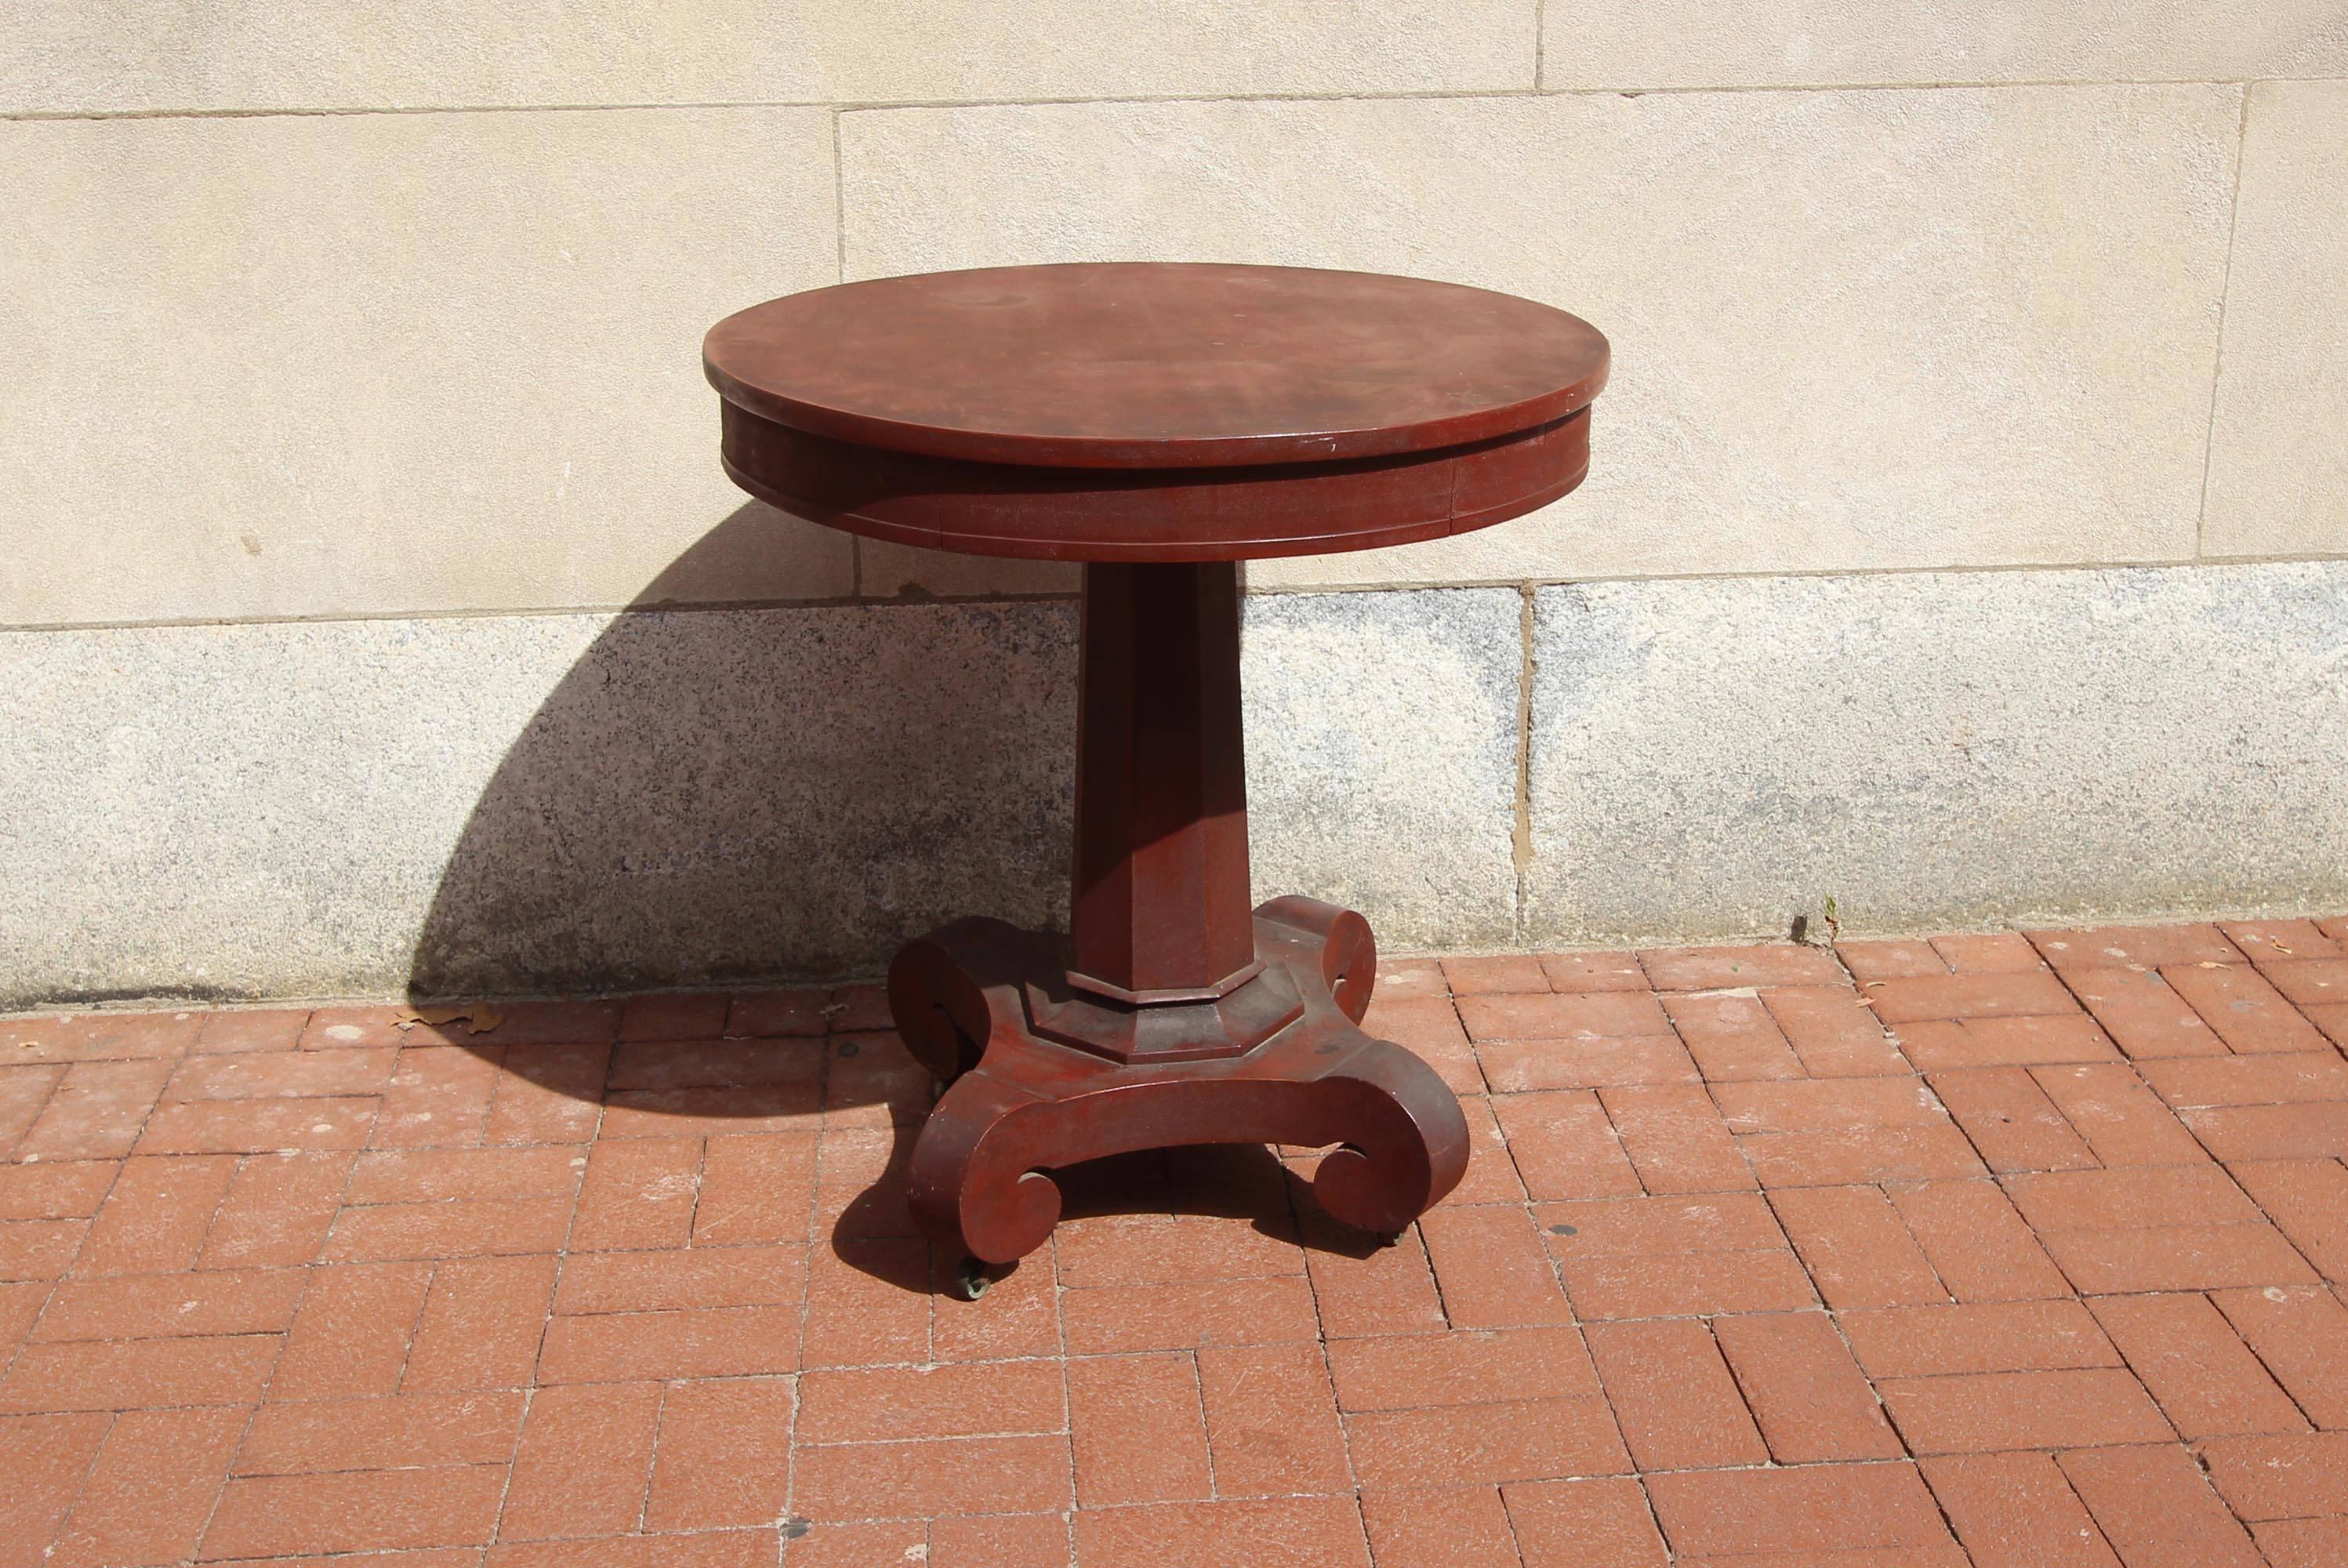 Great-looking center table with a dovetailed drawer, column base, original red paint and casters; American, circa 1840.